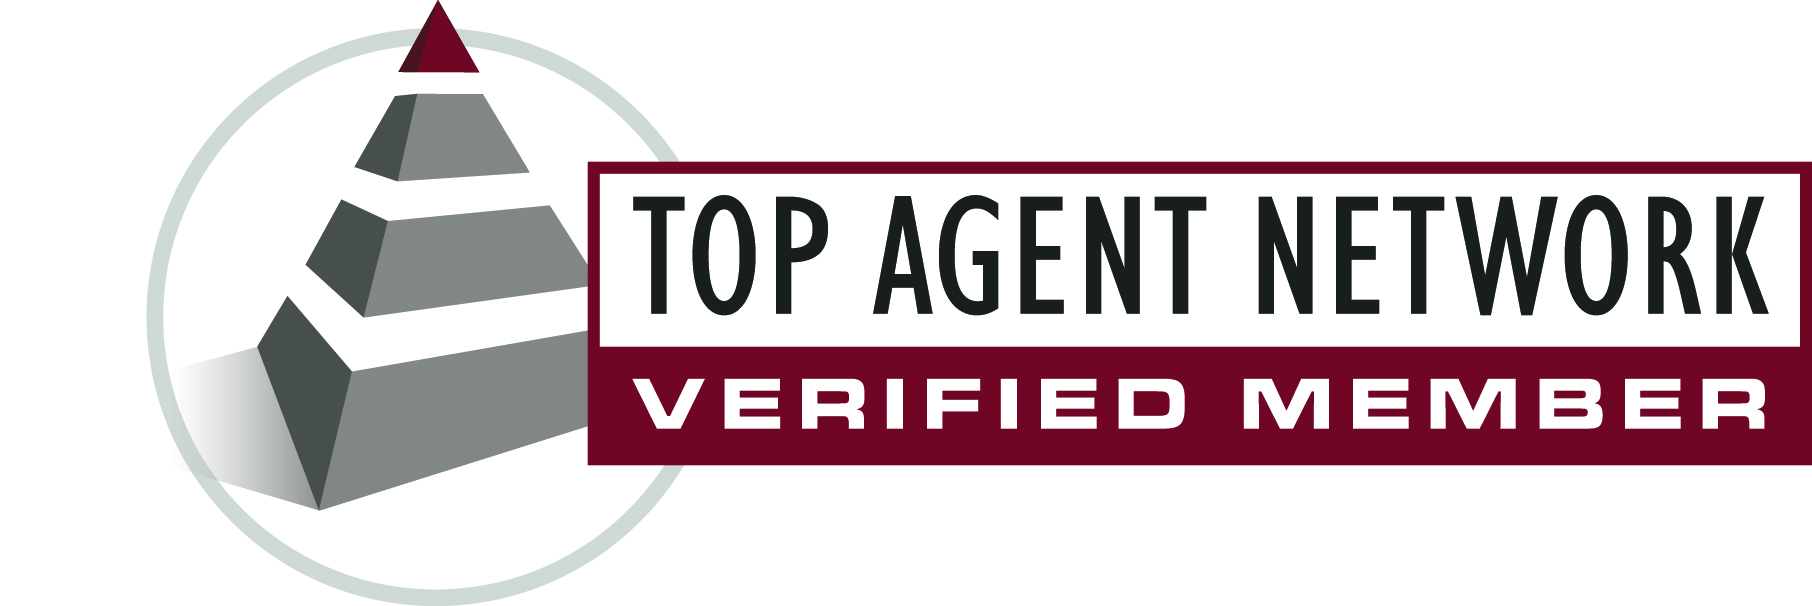 A text banner indicating membership with Top Agent Network